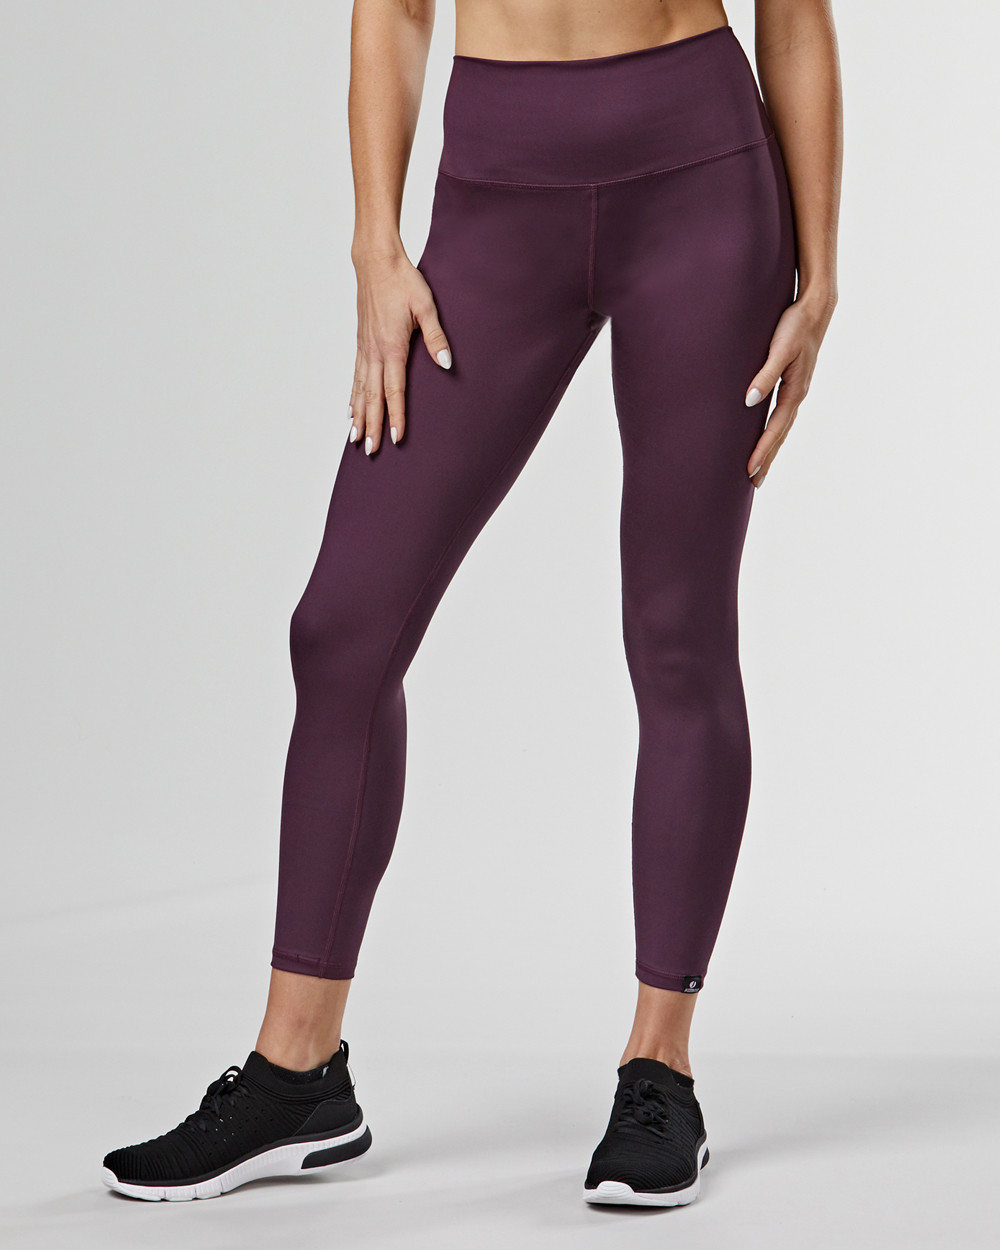 Perfect Fit Legging - JAZZERCISE X GLYDER